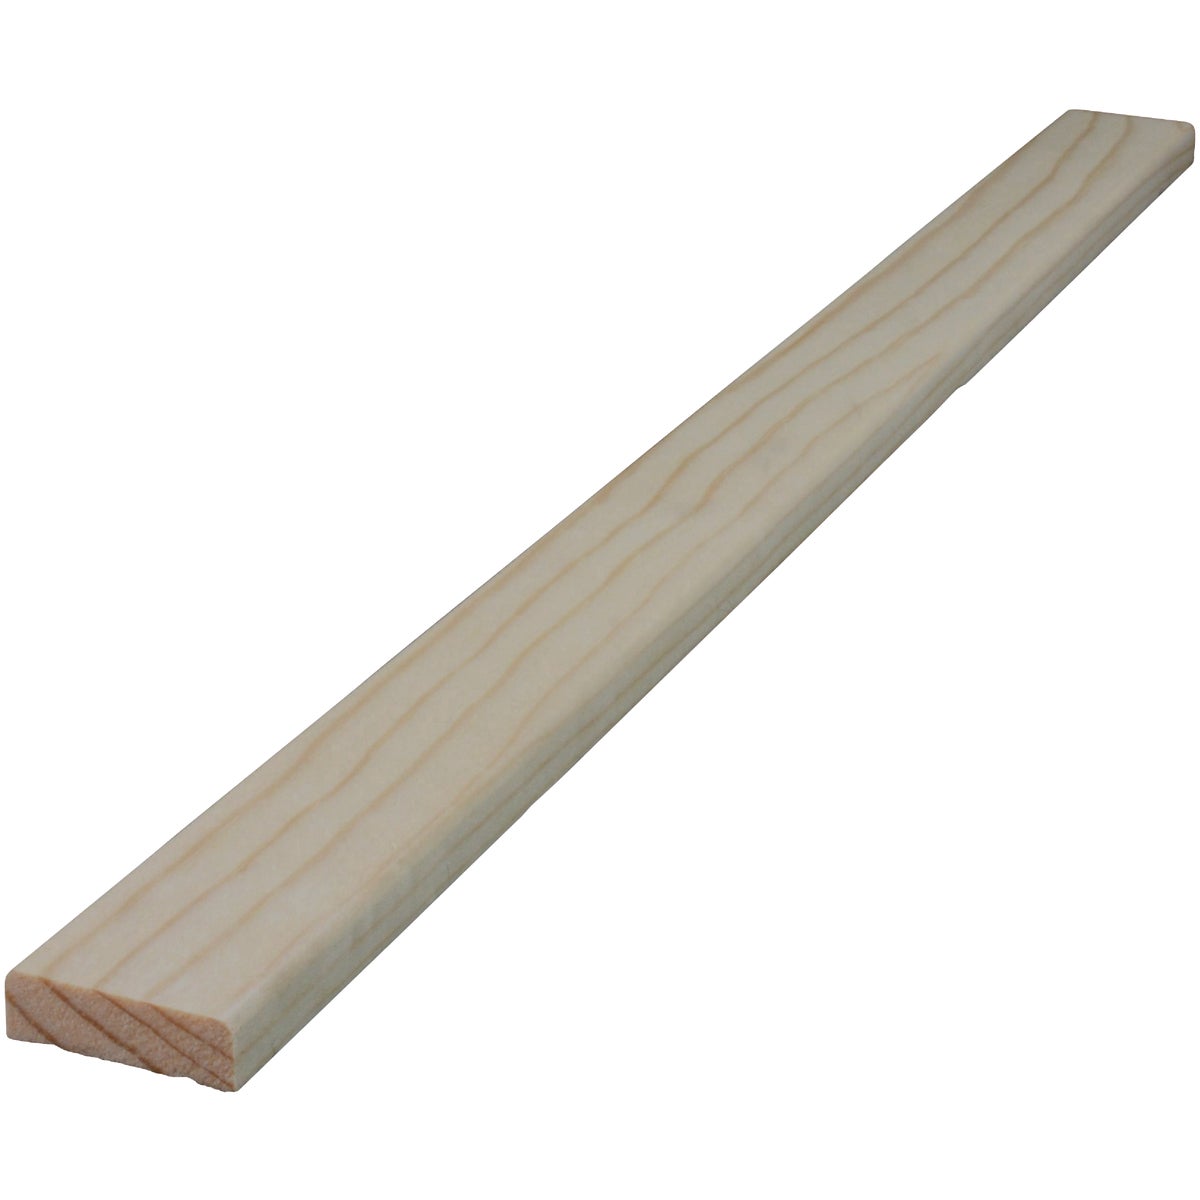 Alexandria Moulding 3/8 In. W. x 1-1/4 In. H. x 7 Ft. L. Solid Pine Stop Molding